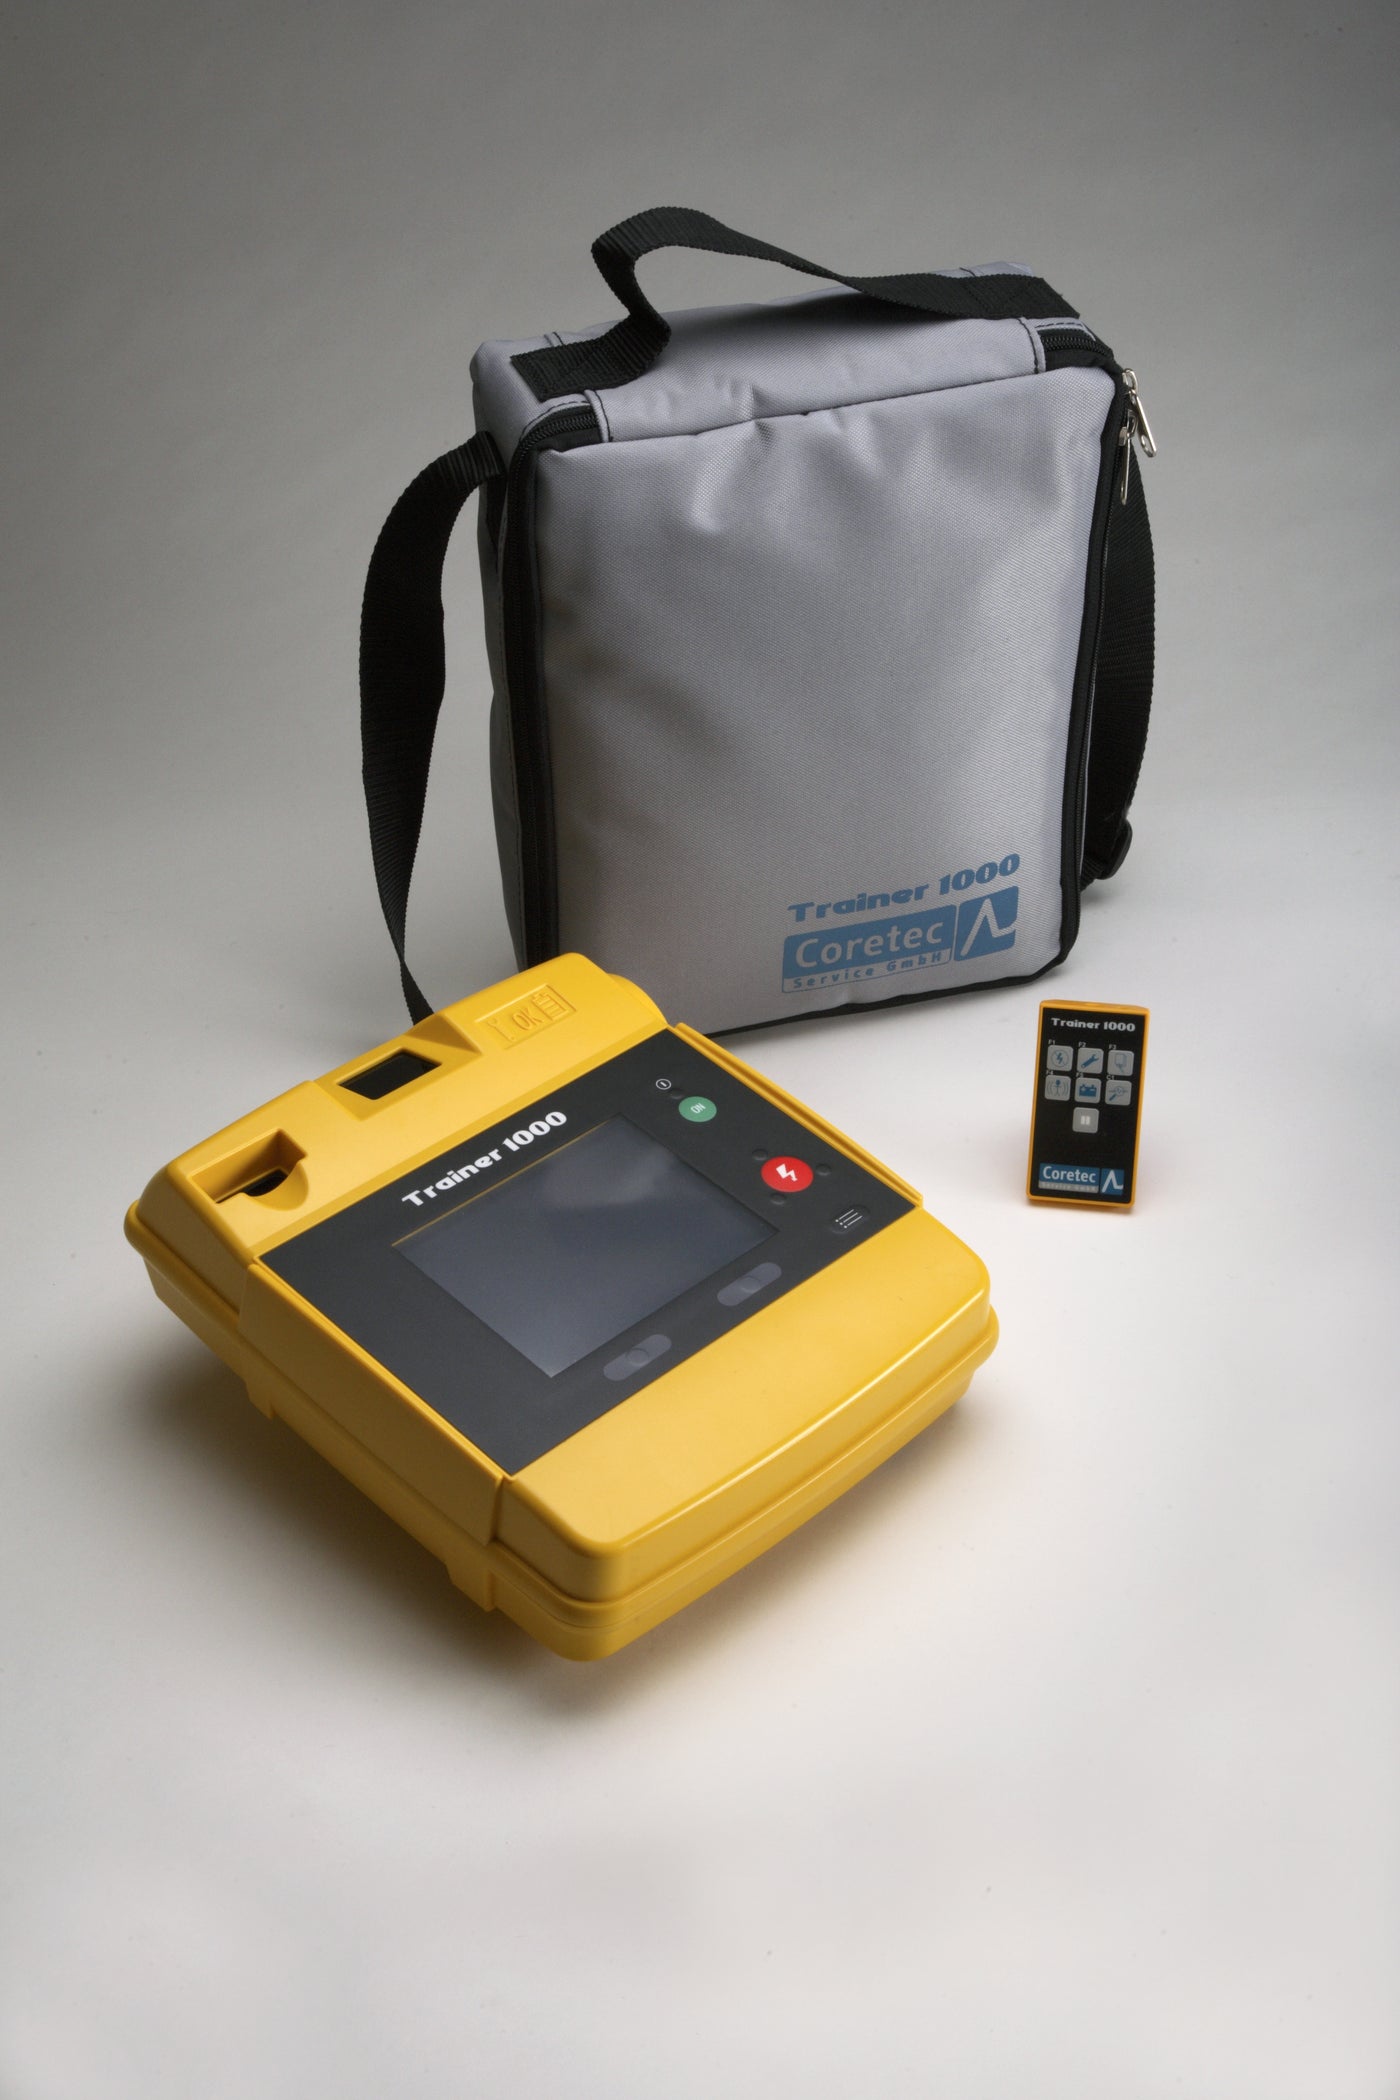 A yellow LIFEPAK 1000 training AED, its remote, and gray carry bag